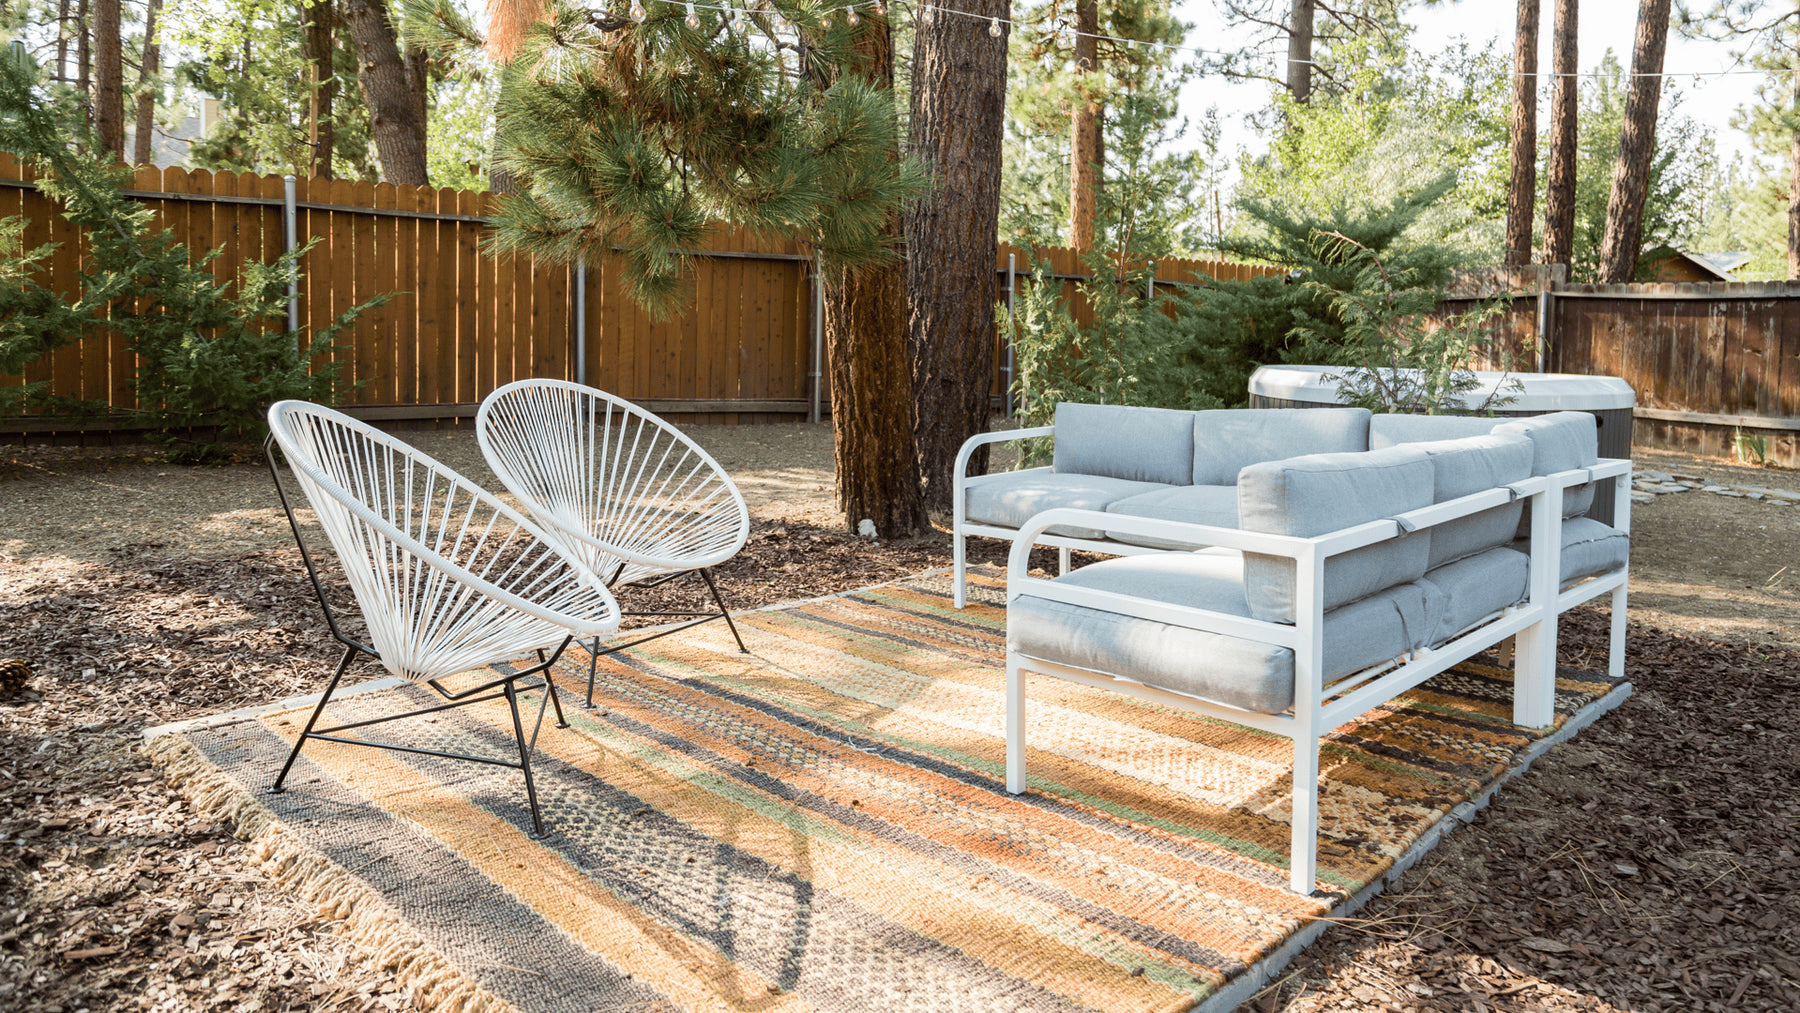 A wooded patio area featuring white Luna outdoor chairs, an outdoor a rug, and sectional.